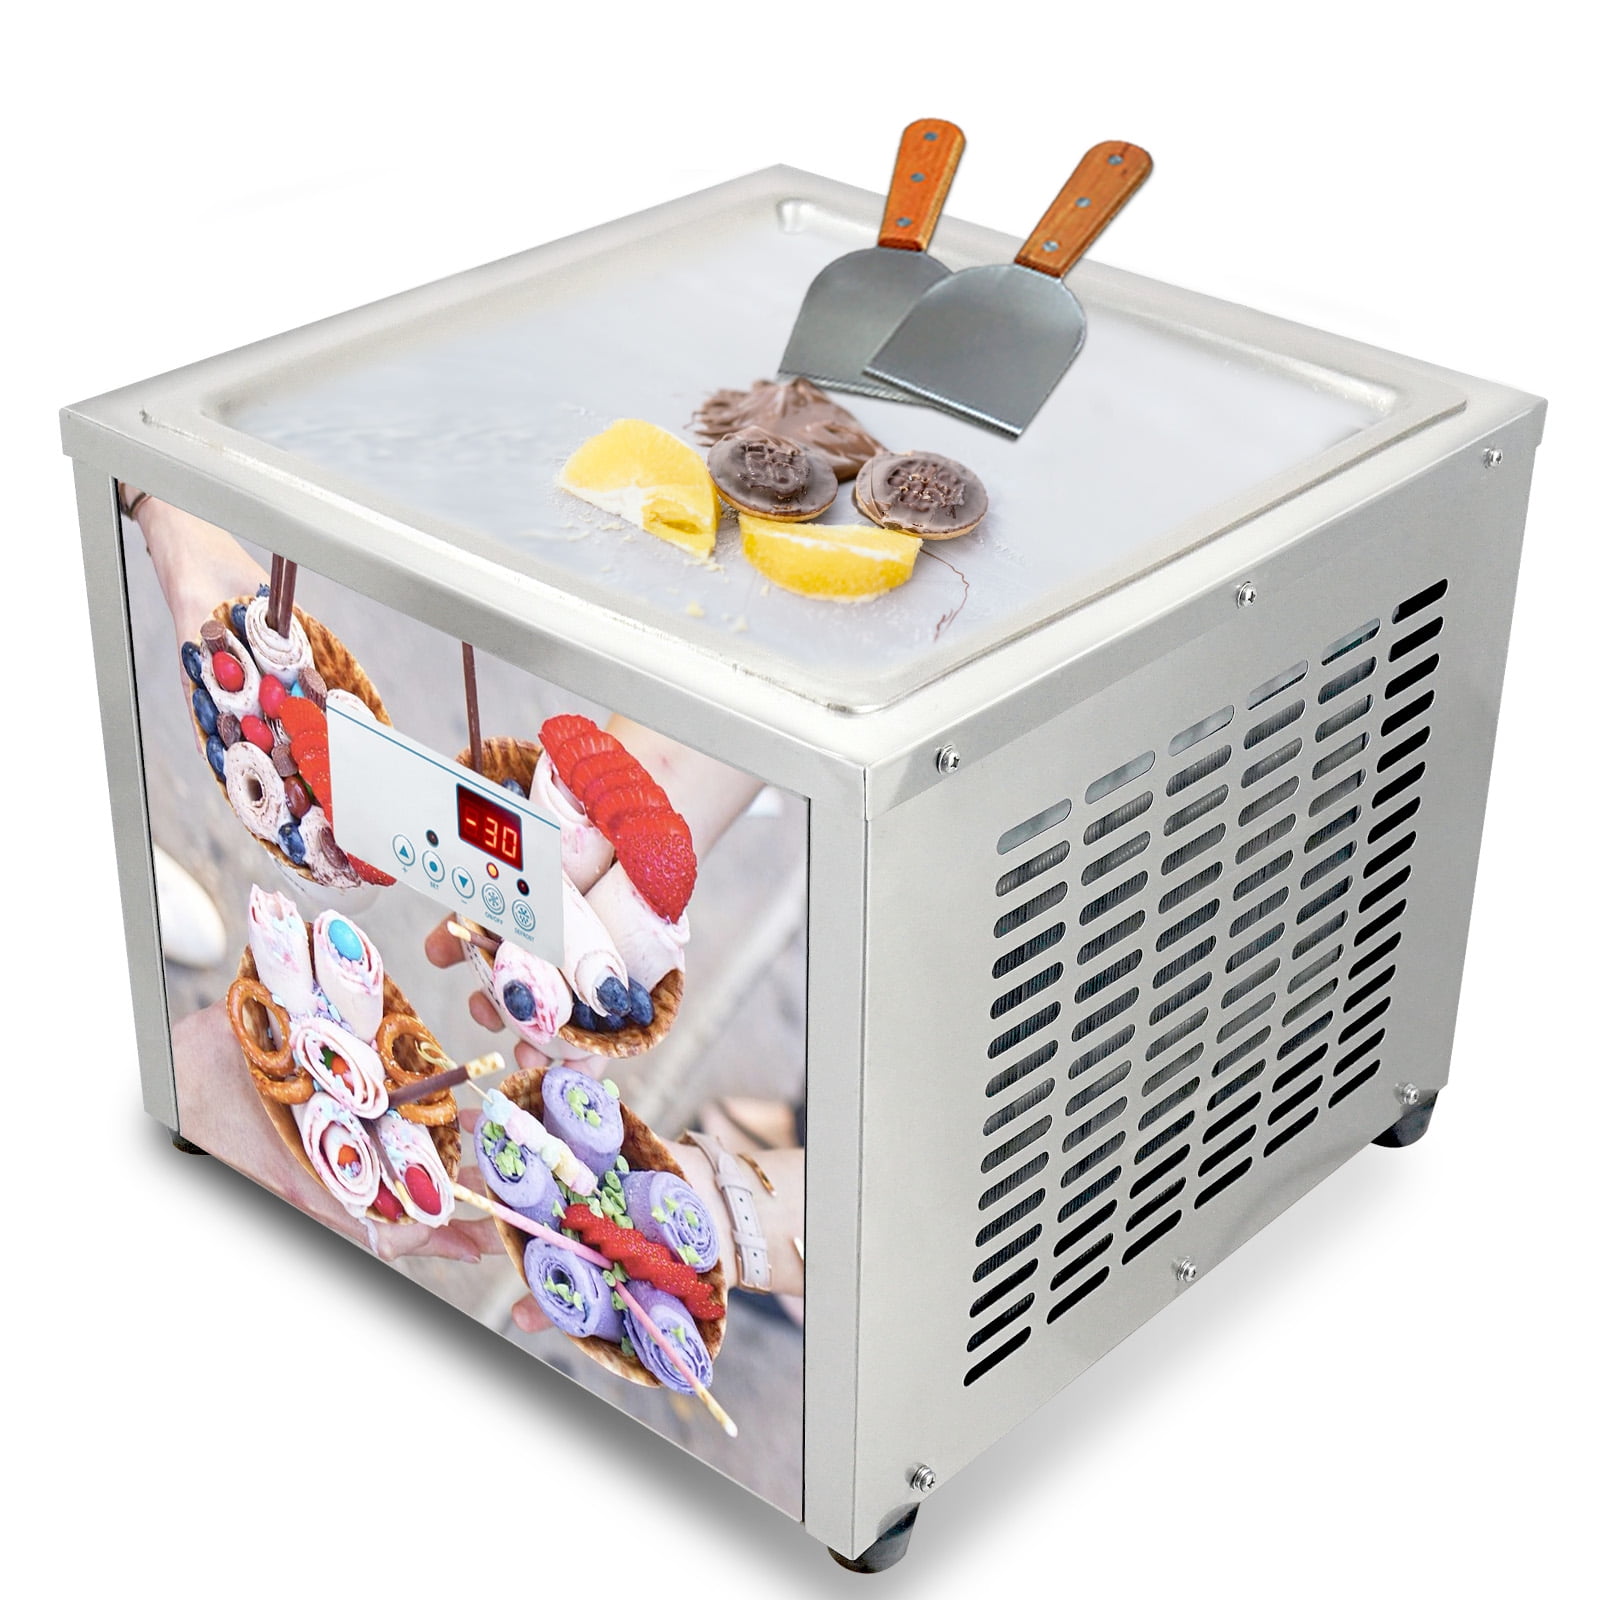 VEVOR Commercial Rolled Ice Cream Machine, 1800W Stir-Fried Ice Roll Machine  Double Pans, Stainless Steel Ice Cream Roll Machine w/ 17.7 Round Pan,  Yogurt Cream Machine for Bars Cafés Dessert Shops